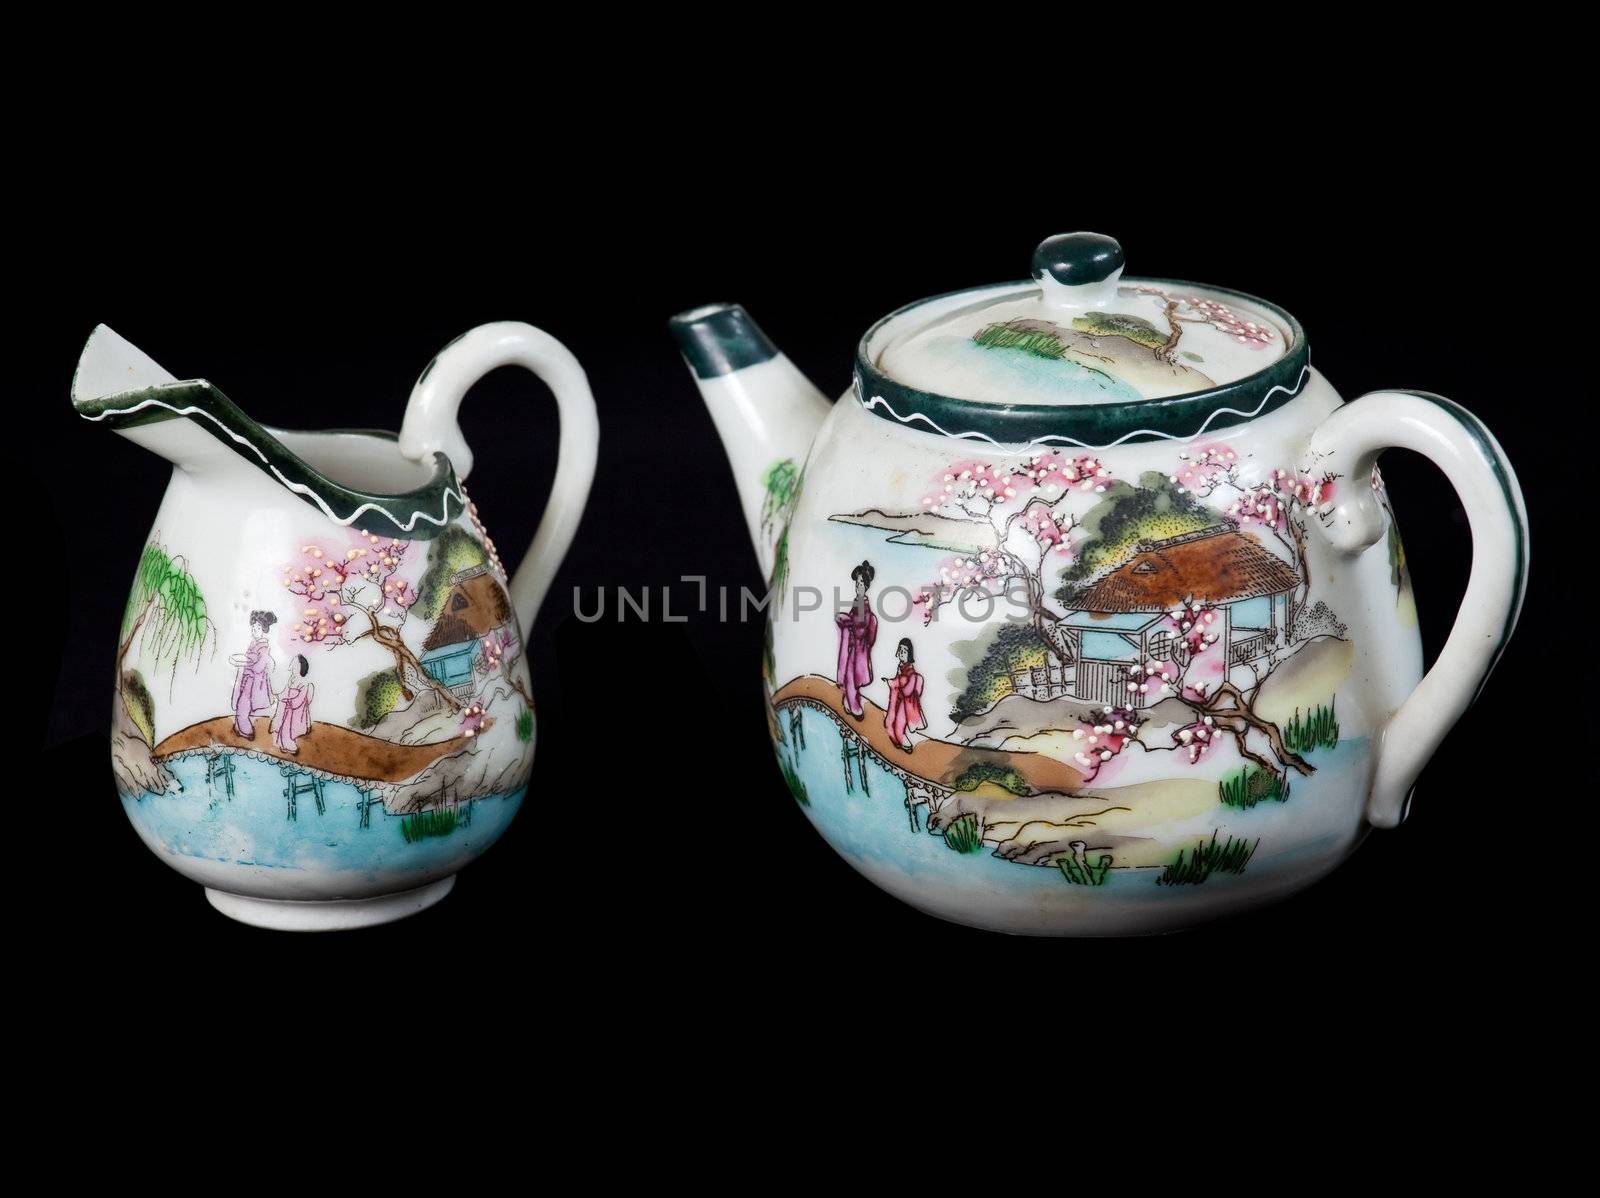 Ancient china teapot and milk jug by steheap